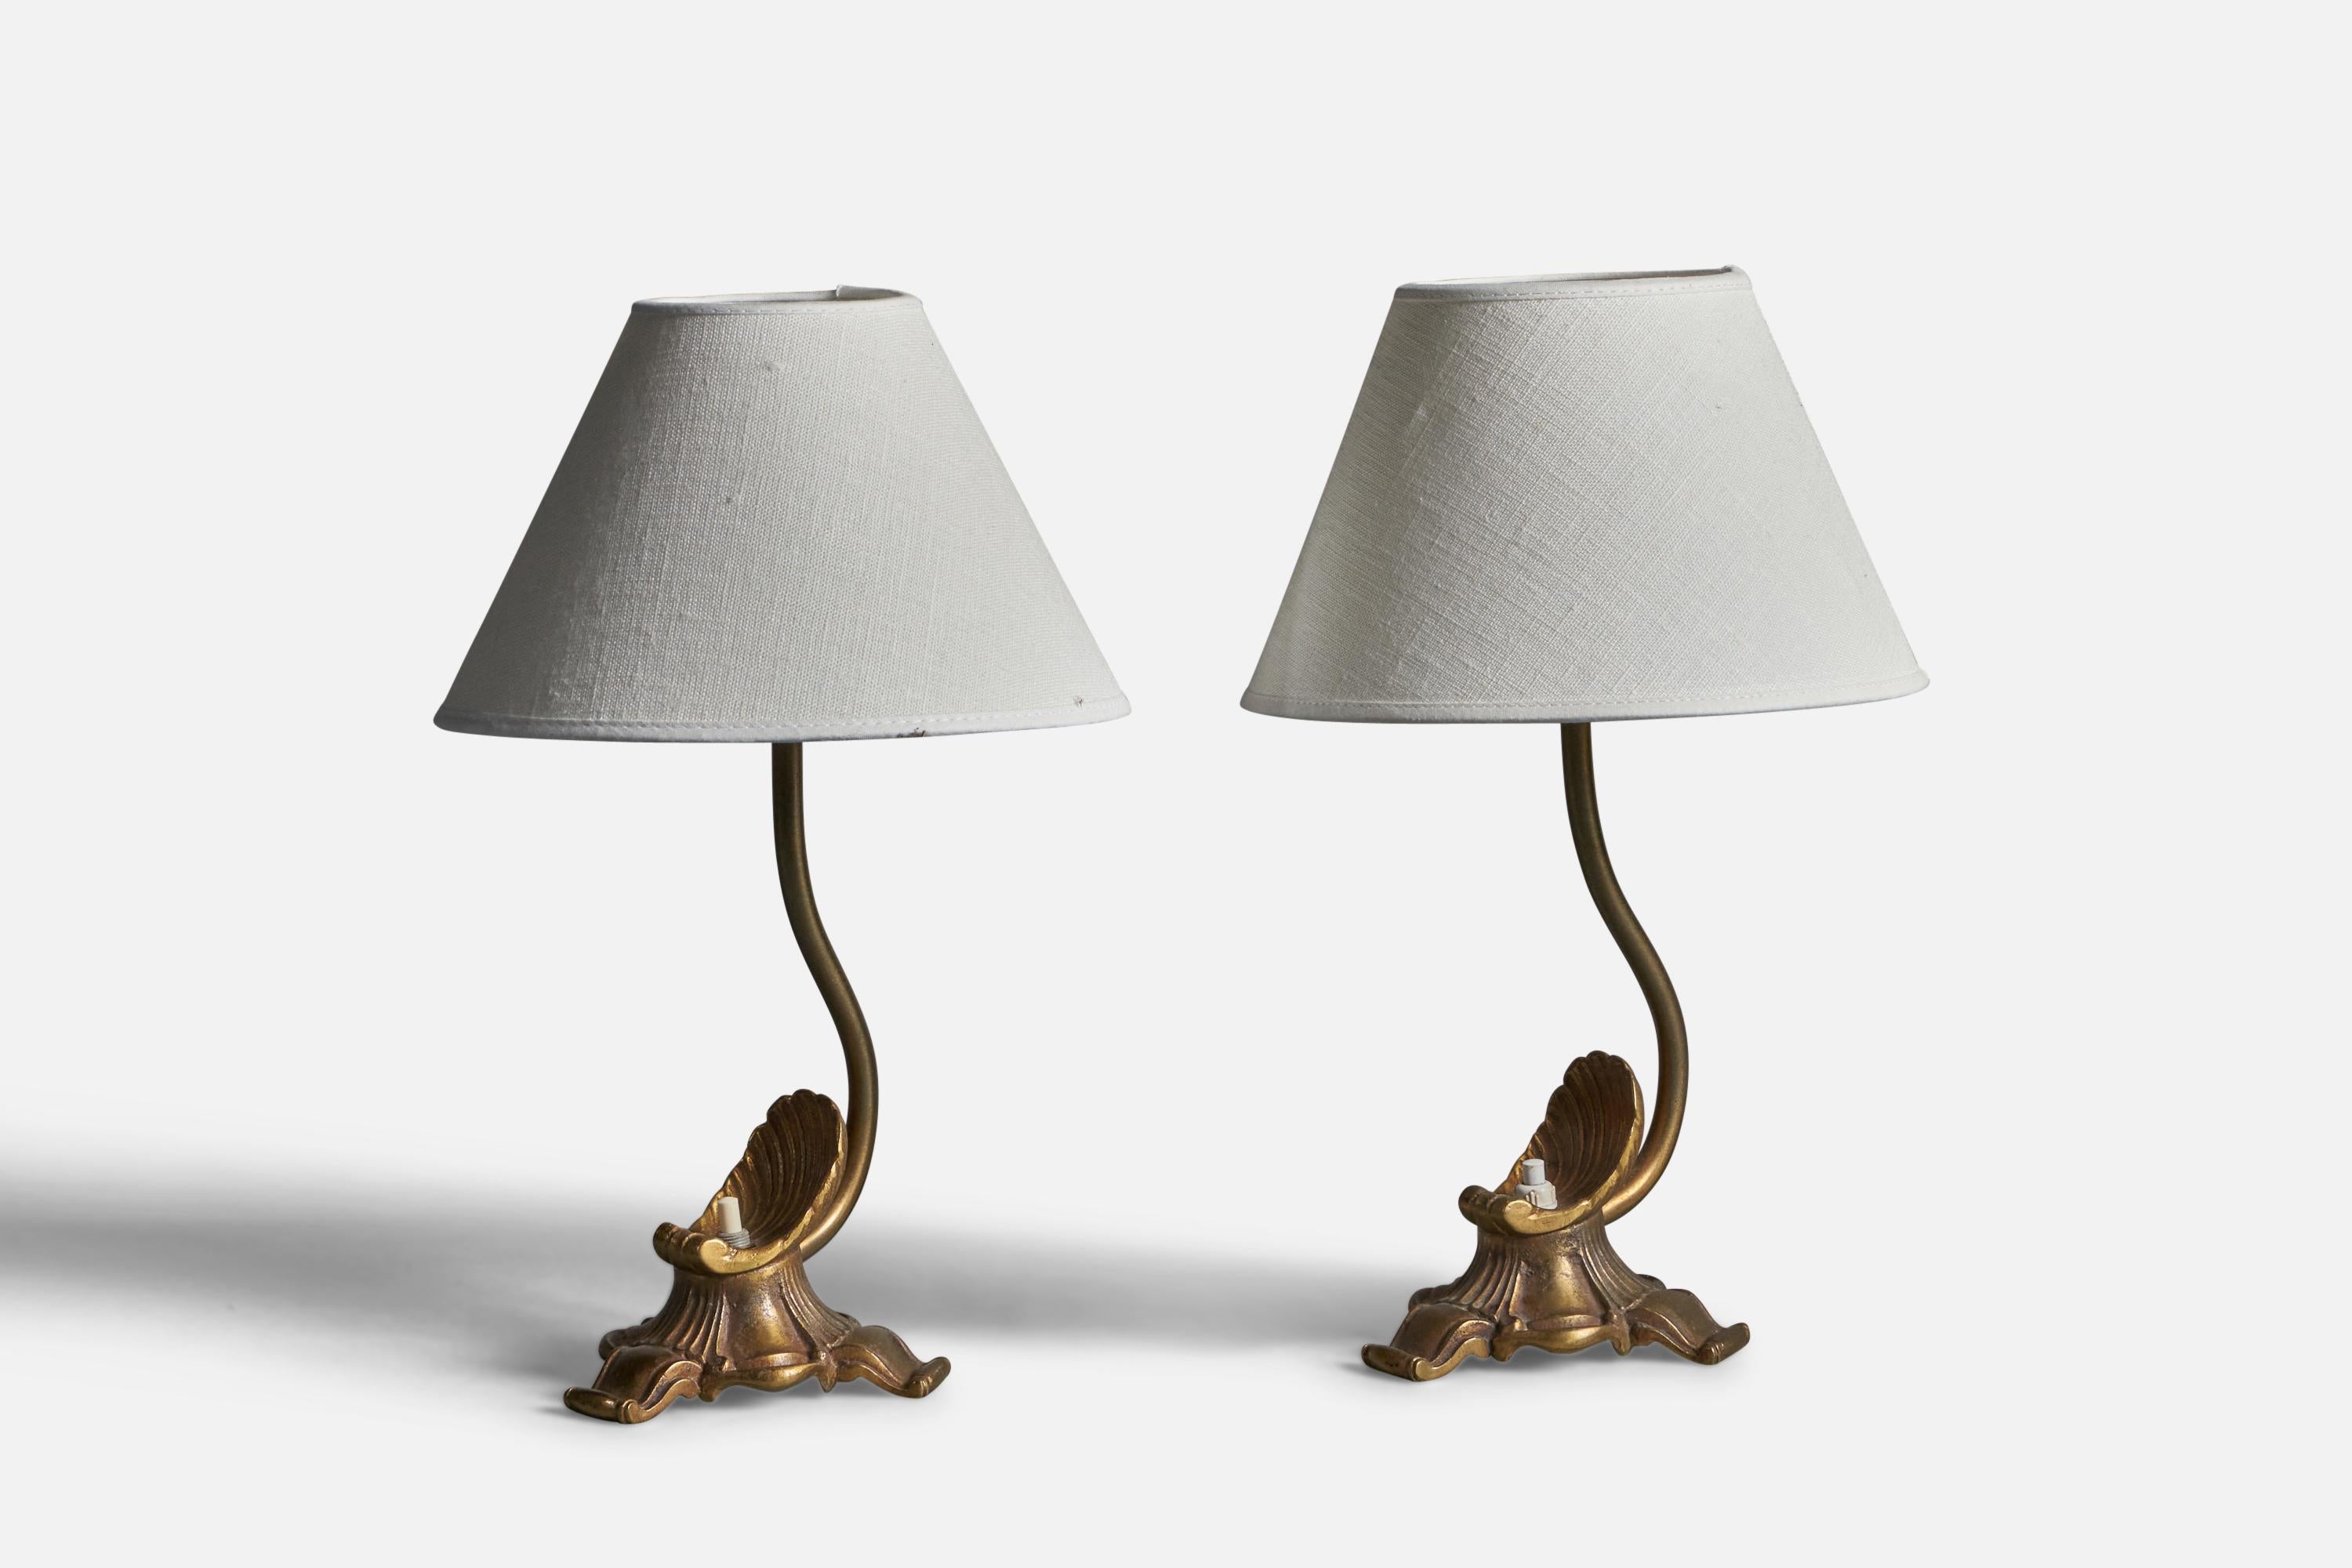 A pair of brass table lamps, designed and produced in Sweden, 1930s.

Dimensions of Lamp (inches): 10.25